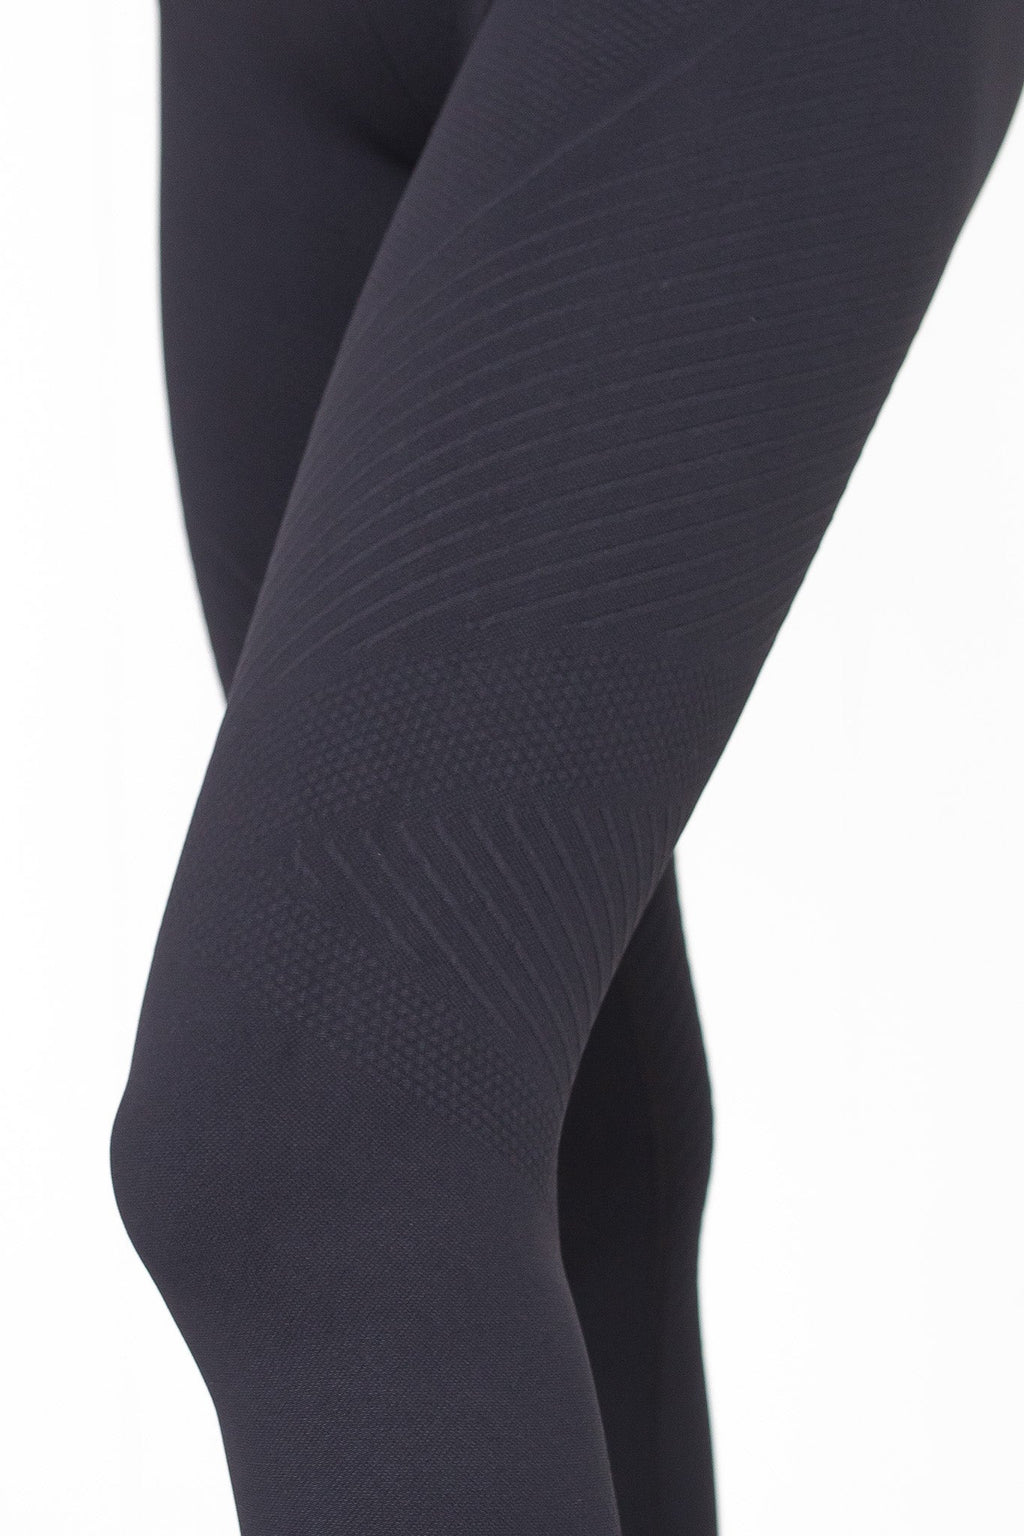 Motion Seamless Tights